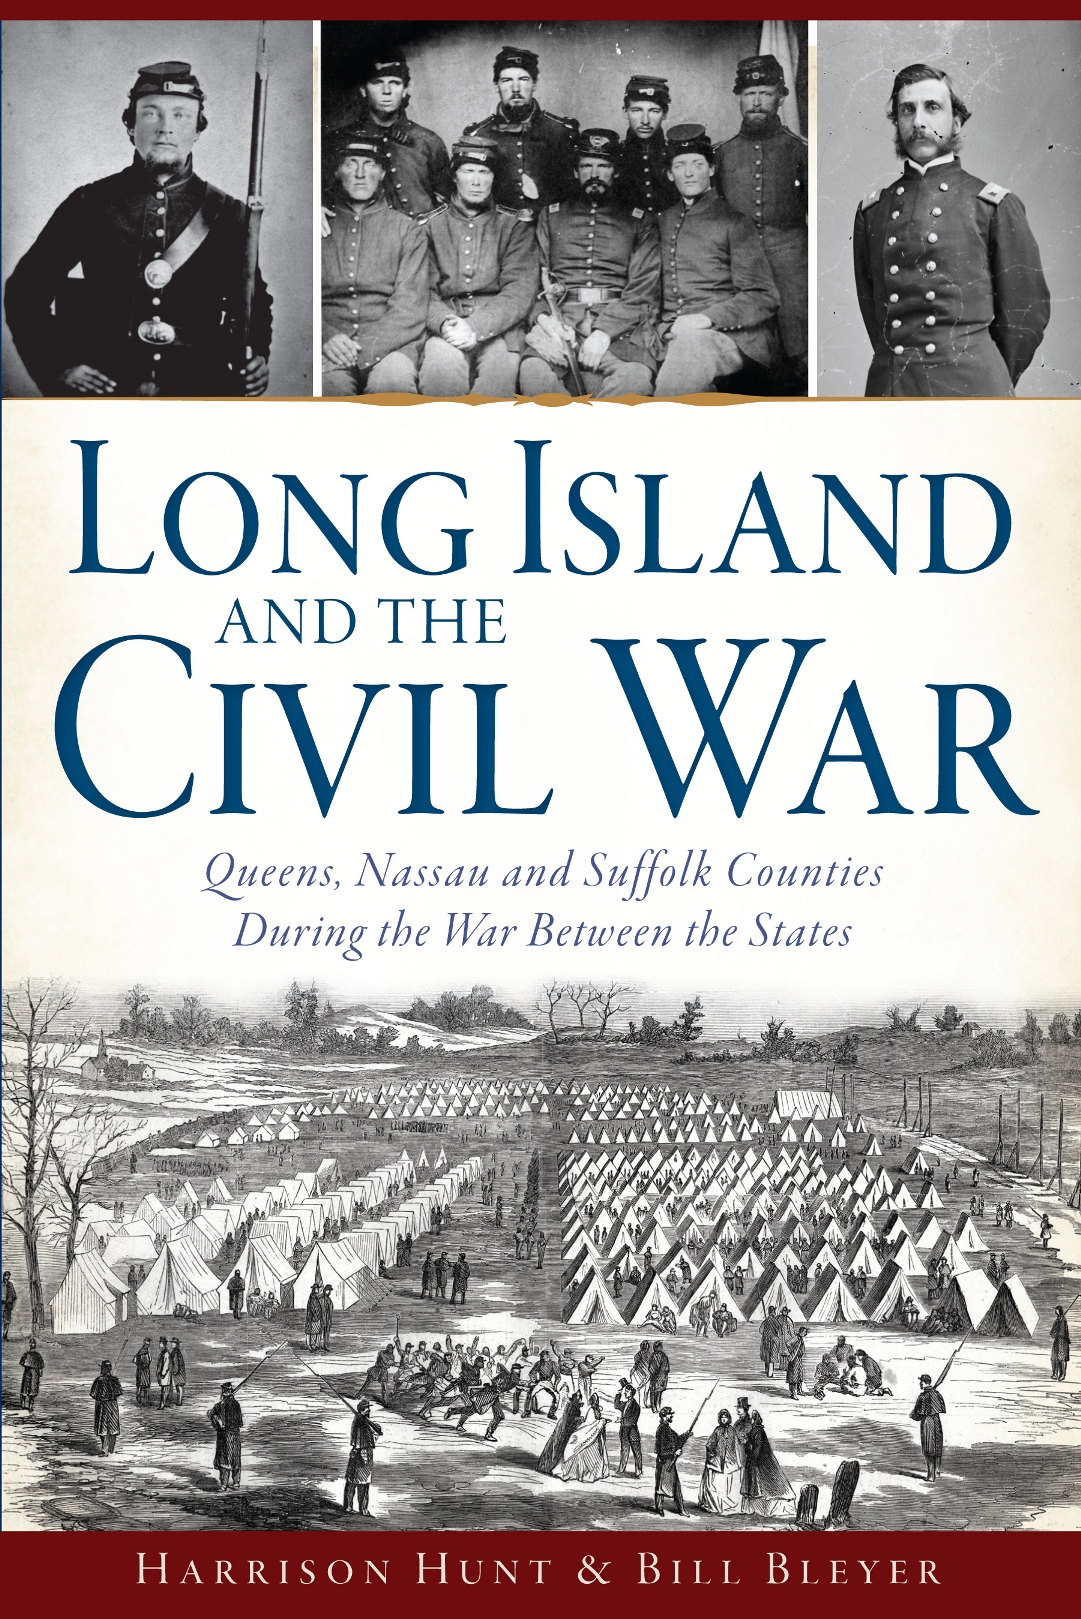 Long Island and the Civil War, Hammond review